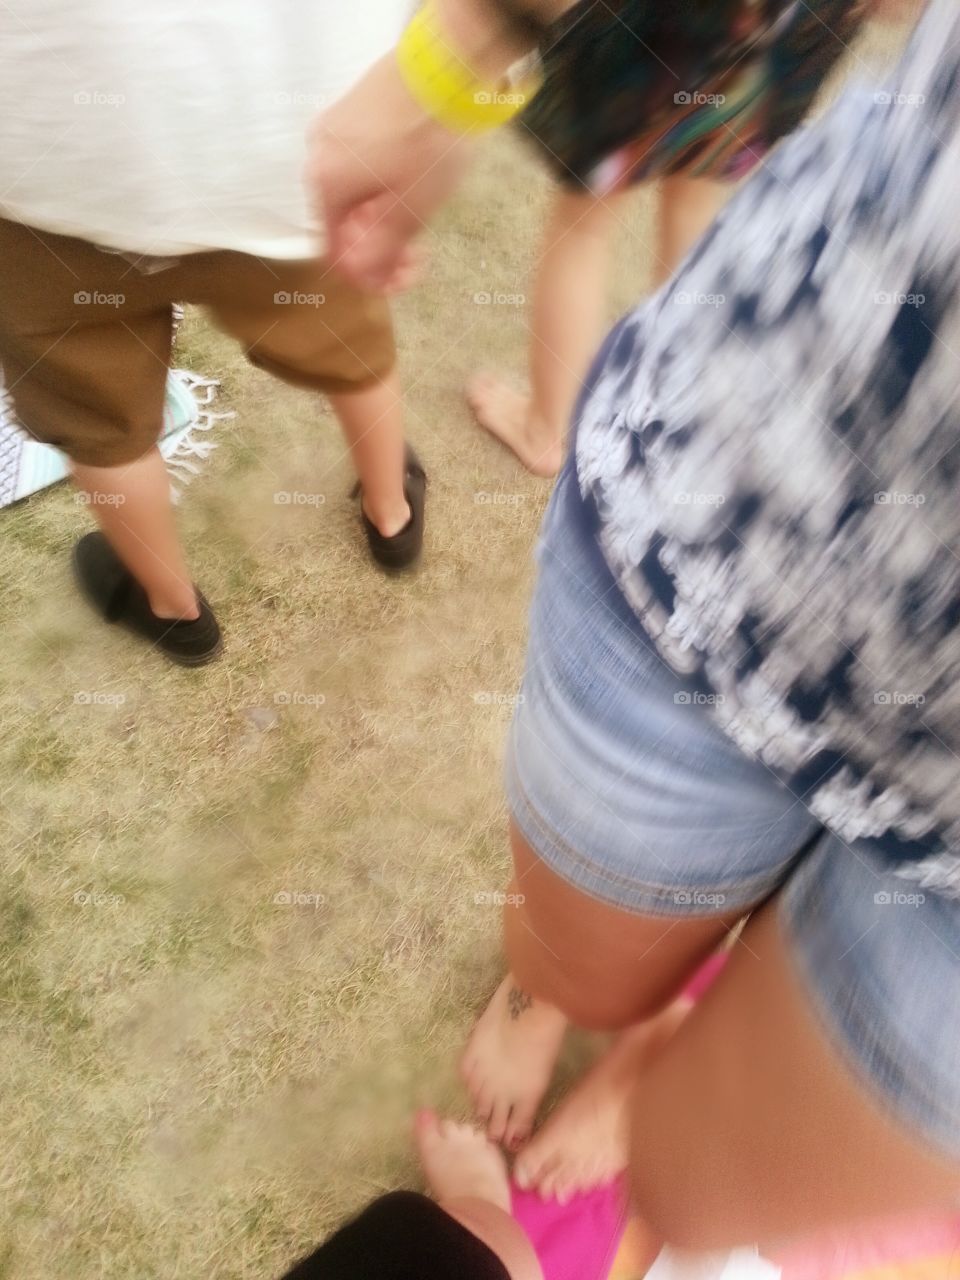 Barefoot dancing at a music festival